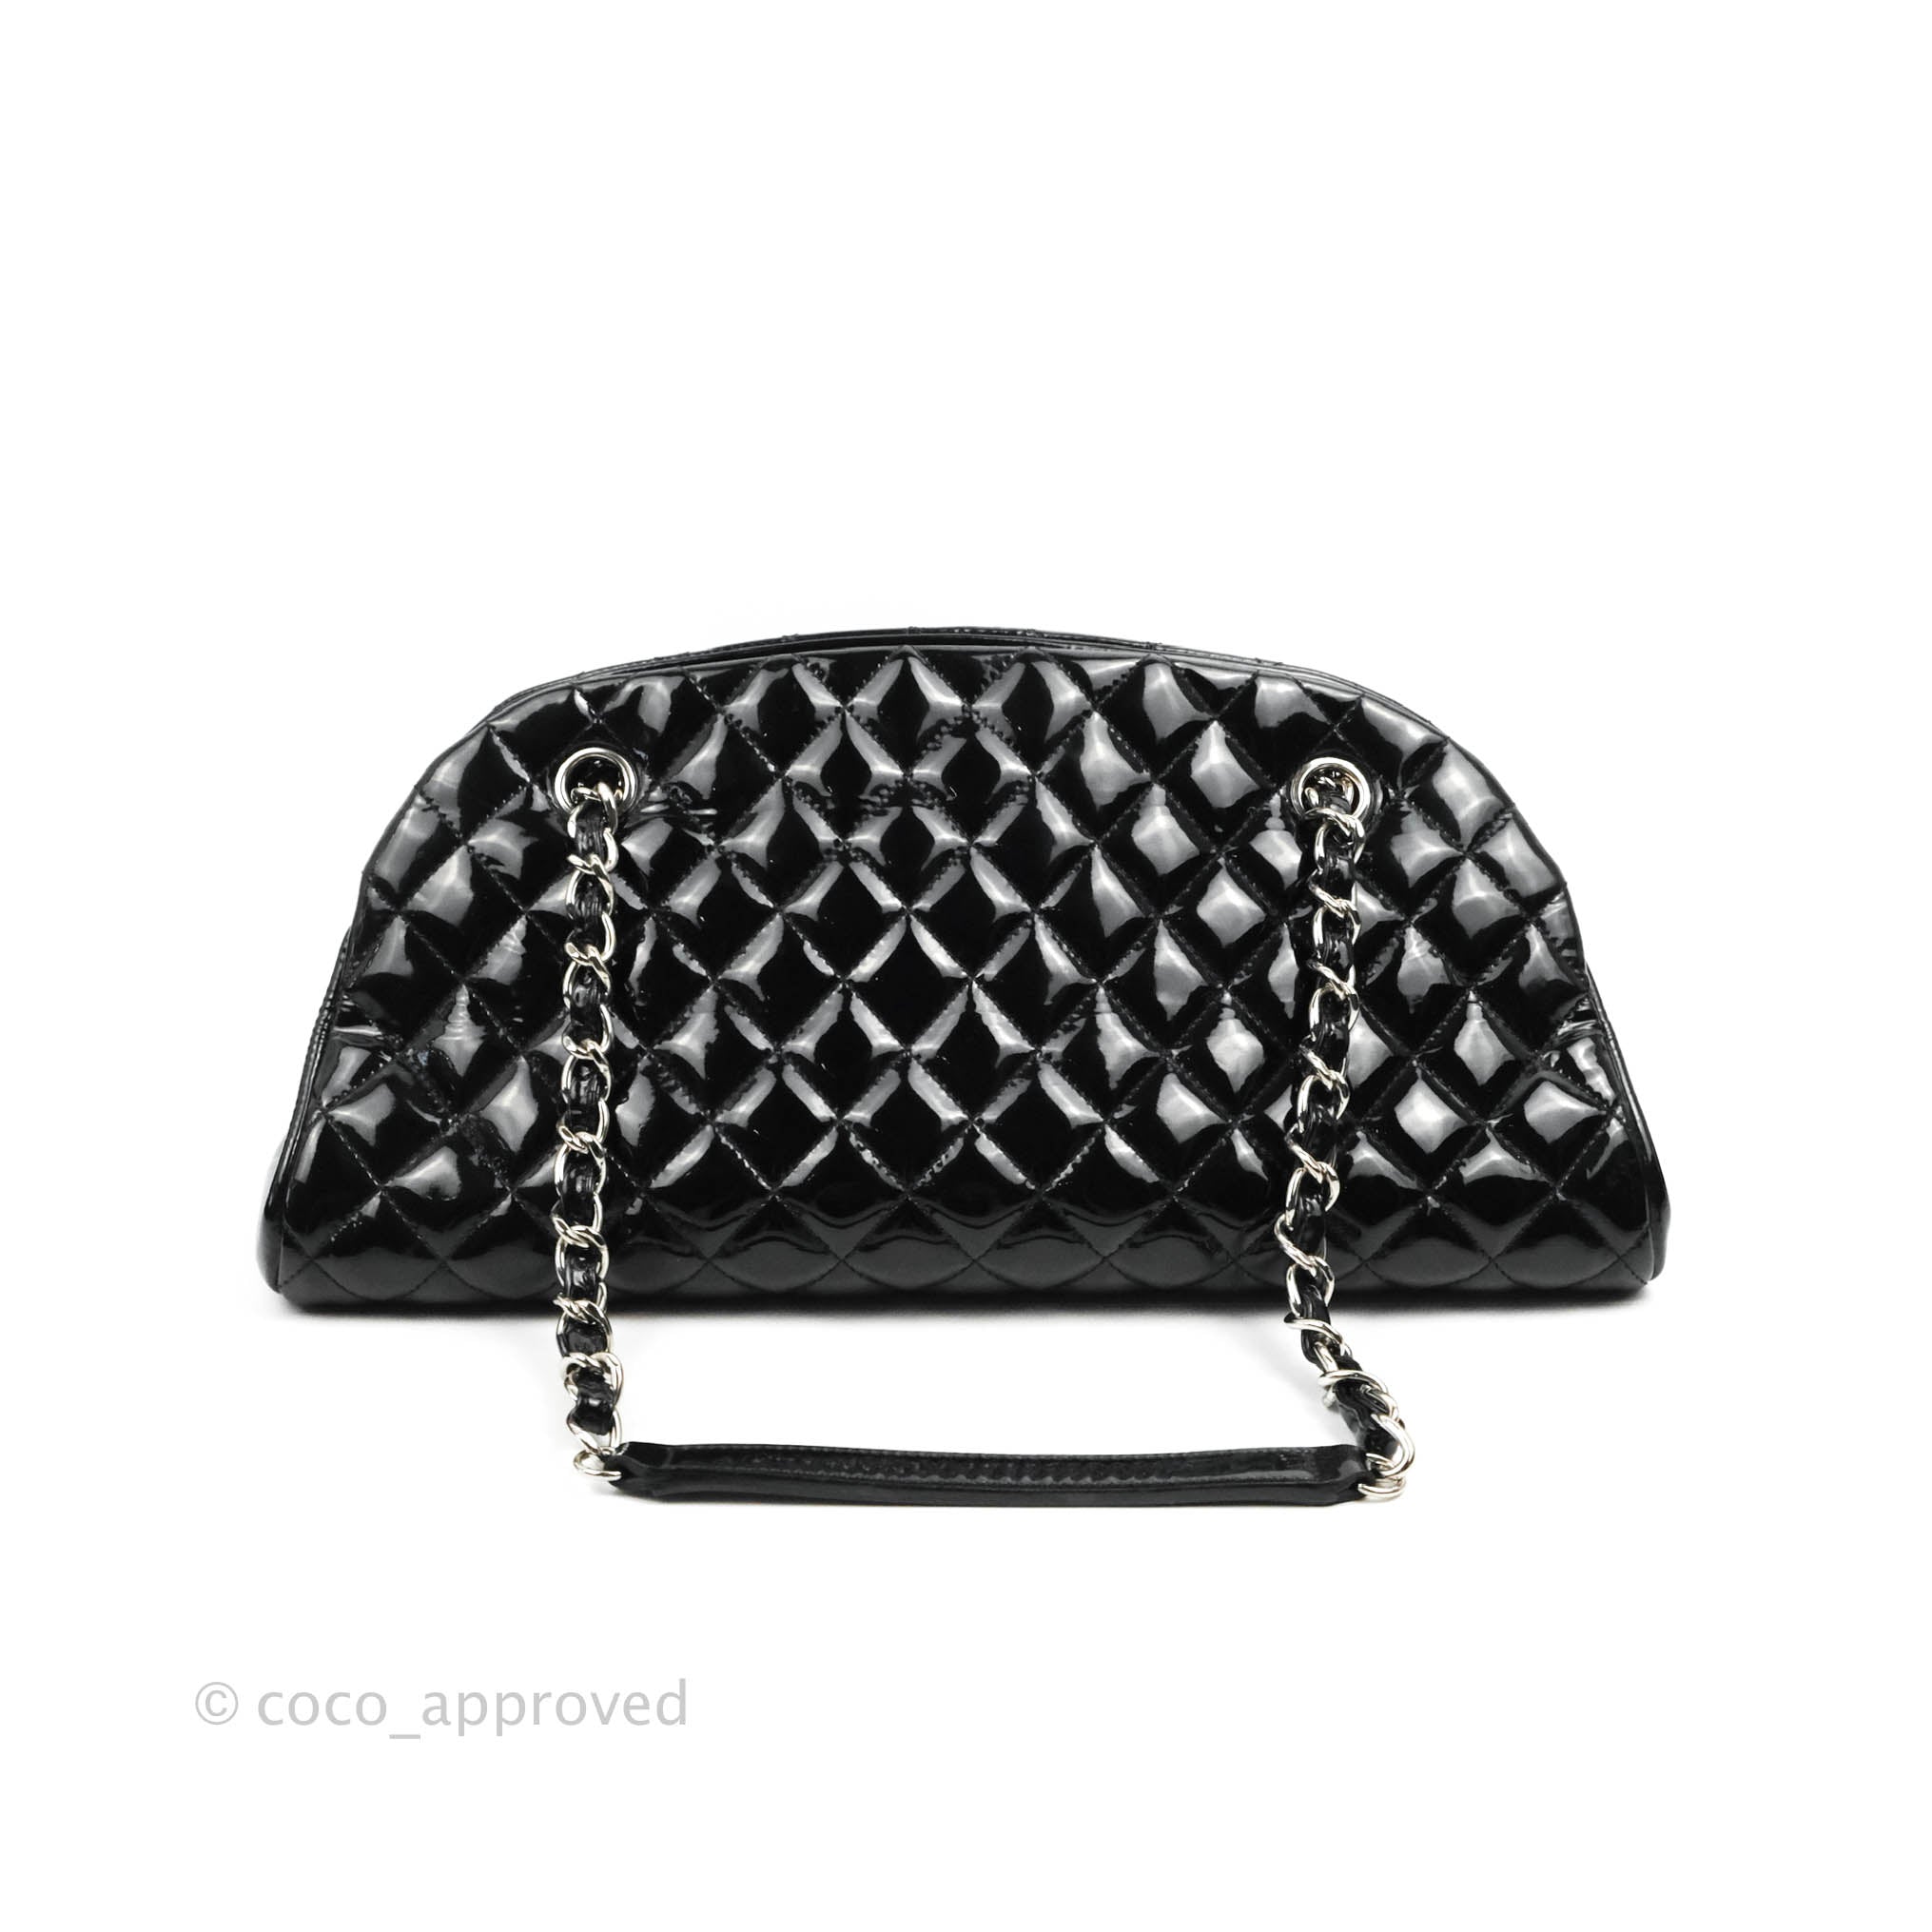 Chanel Black Quilted Caviar Leather 'bowling' Bag